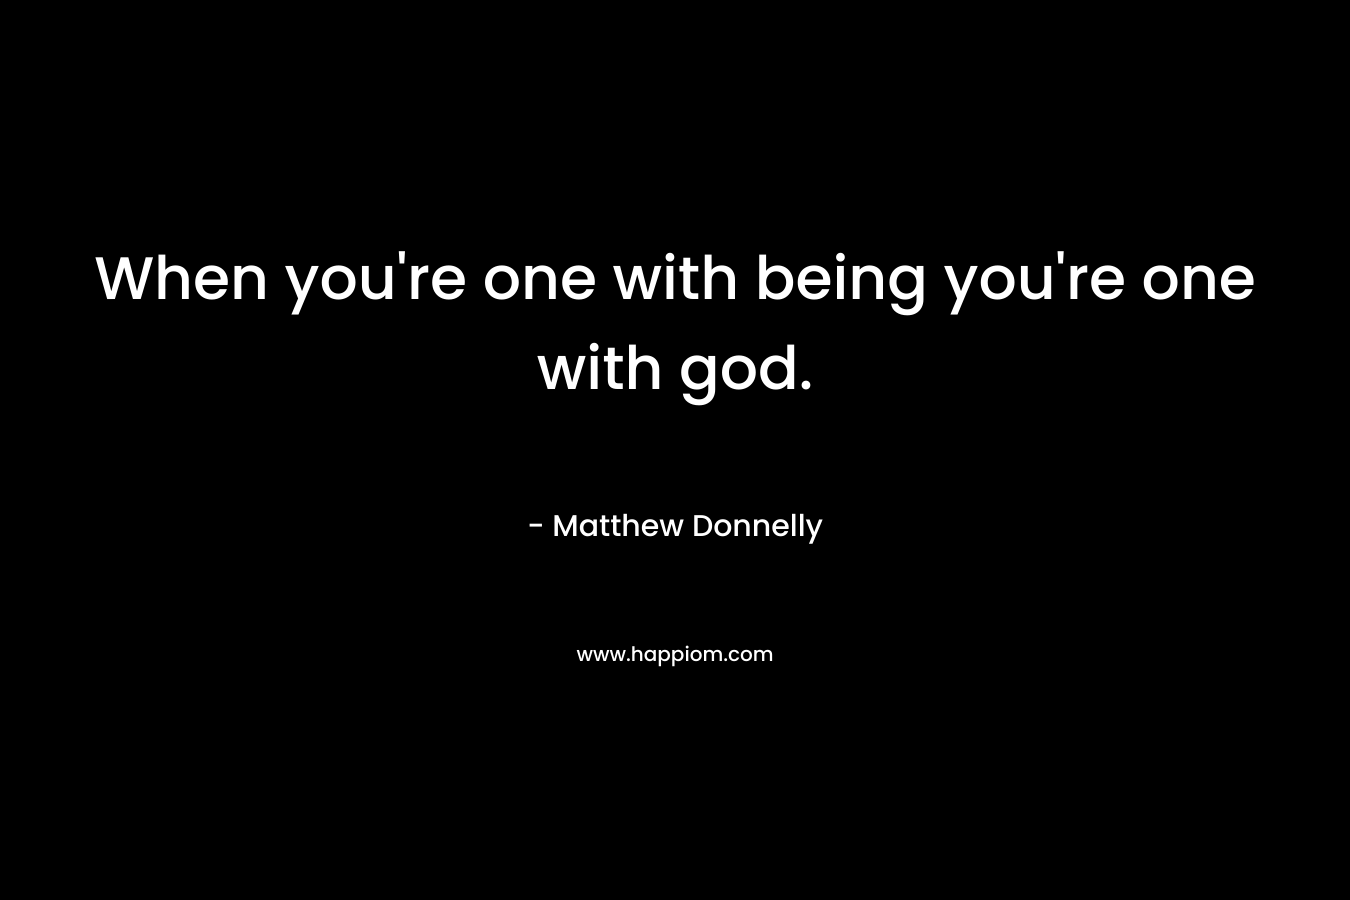 When you’re one with being you’re one with god. – Matthew Donnelly